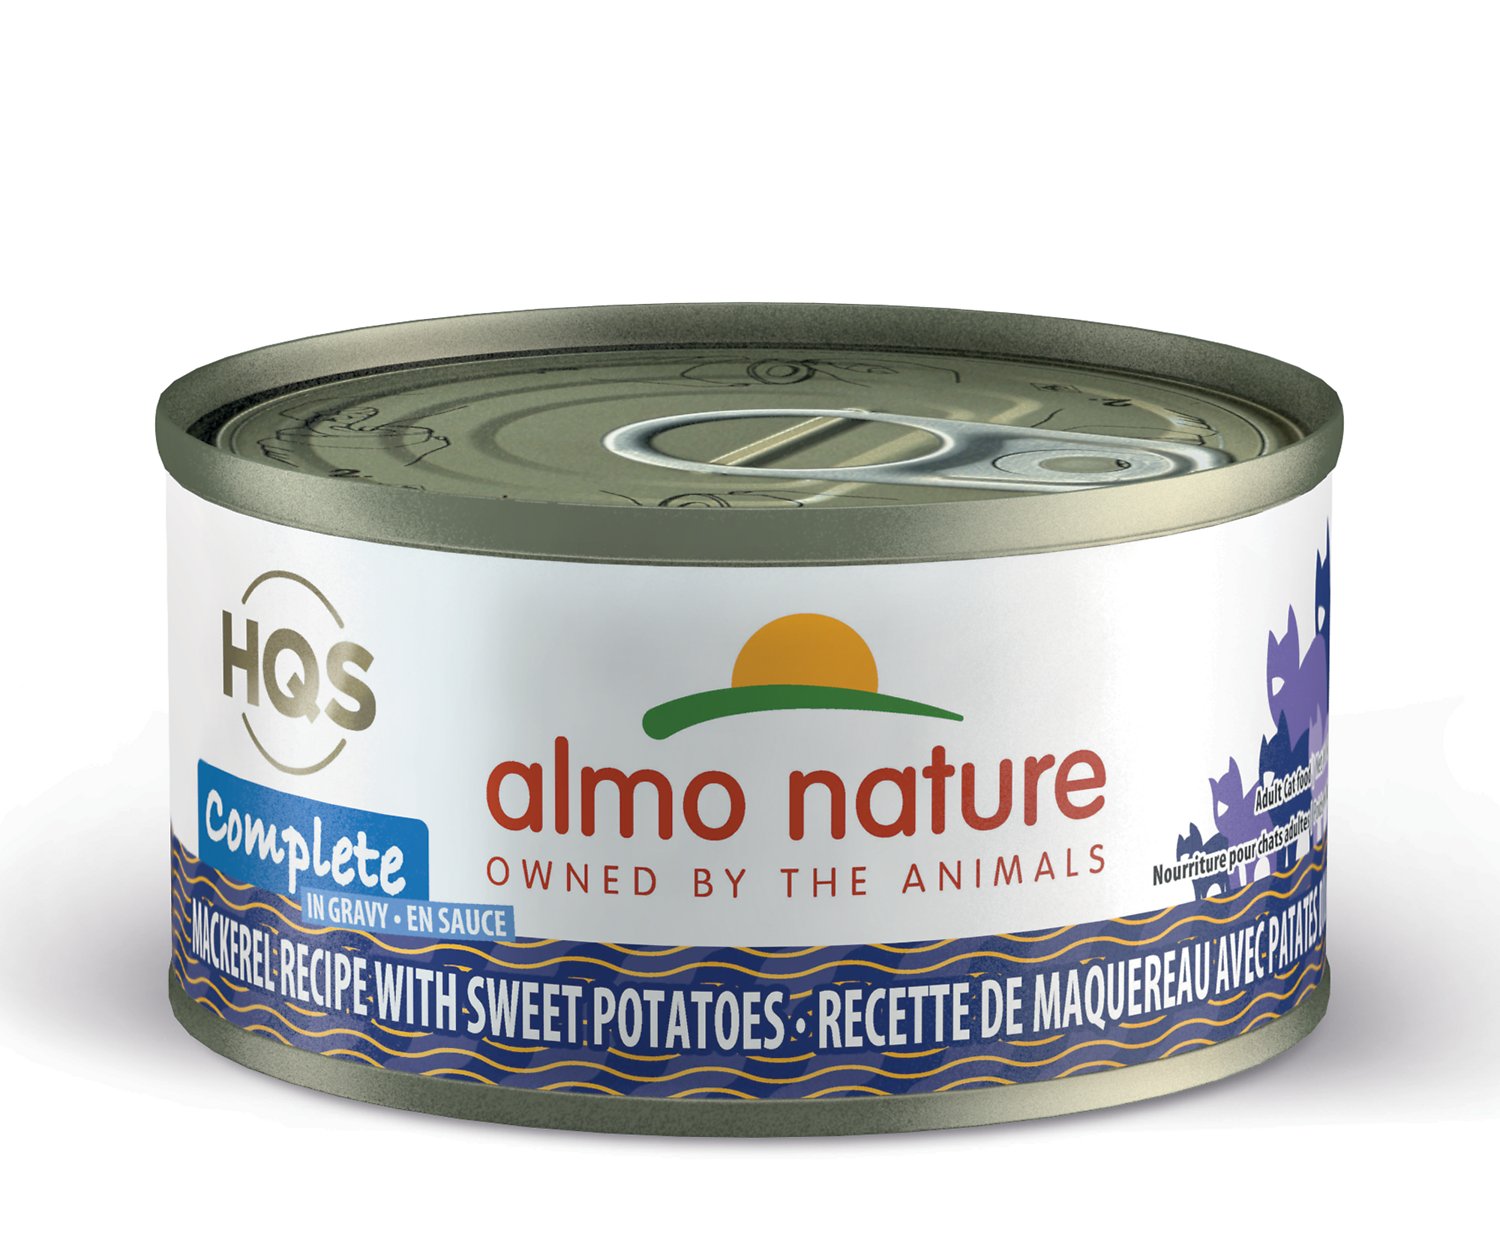 Almo Nature Cat Food | ARMOR THE POOCH